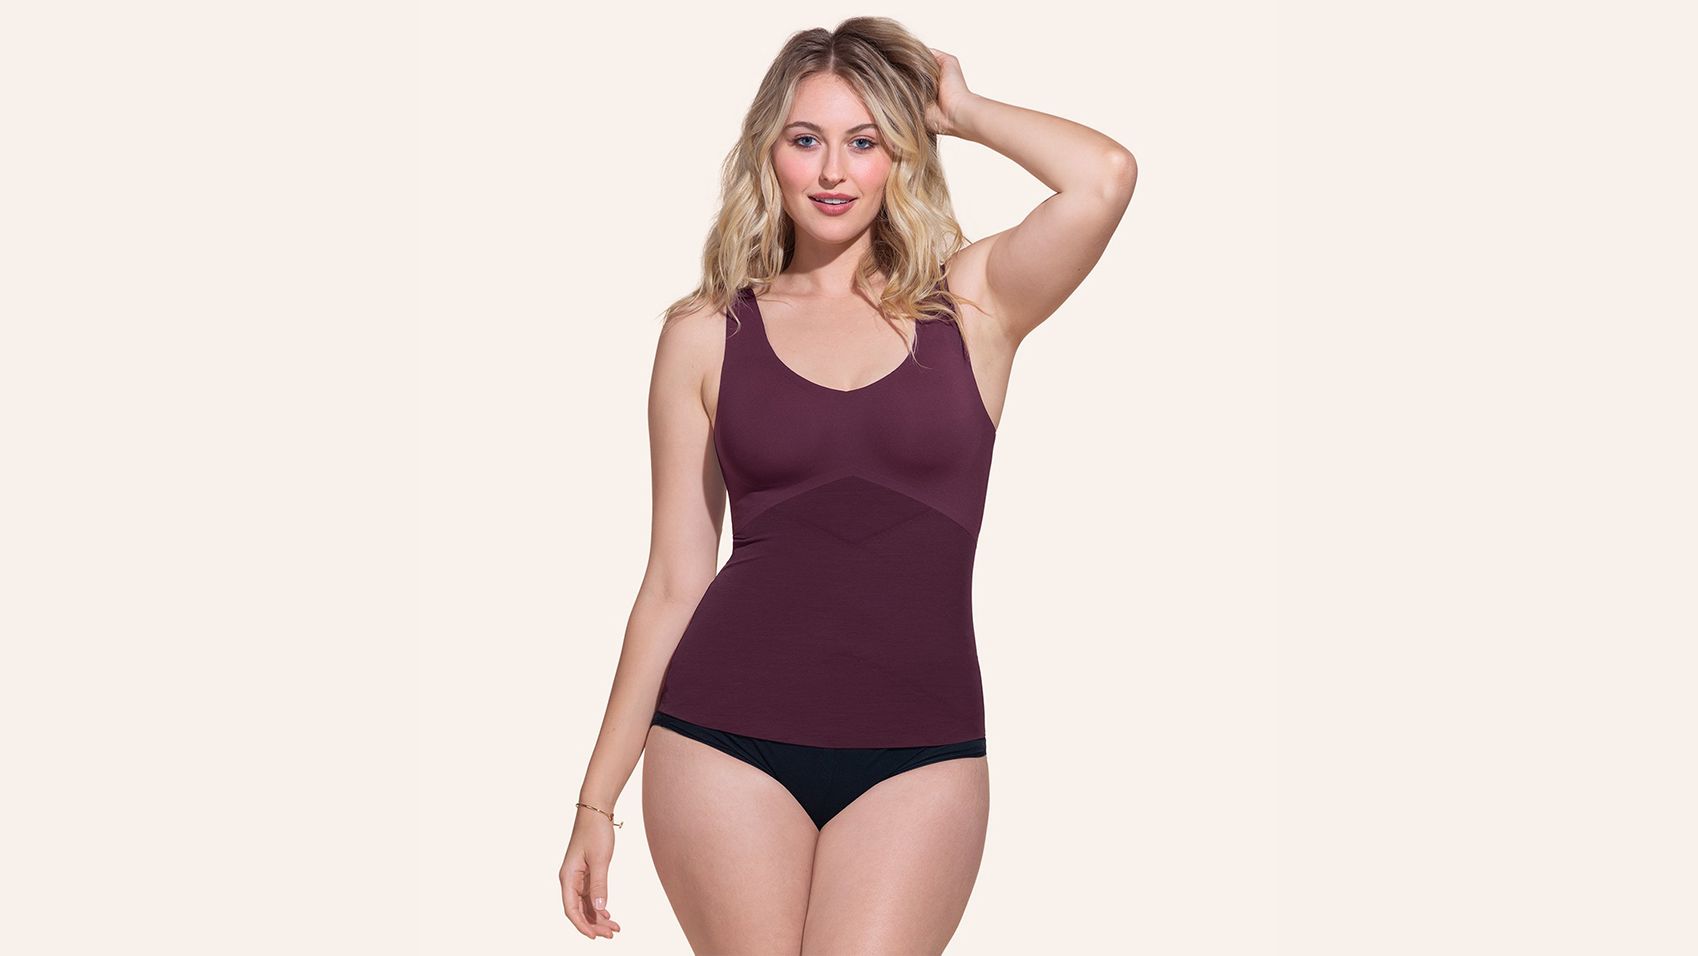 The Best Tummy Smoothing Shapewear: Review of the New Honeylove